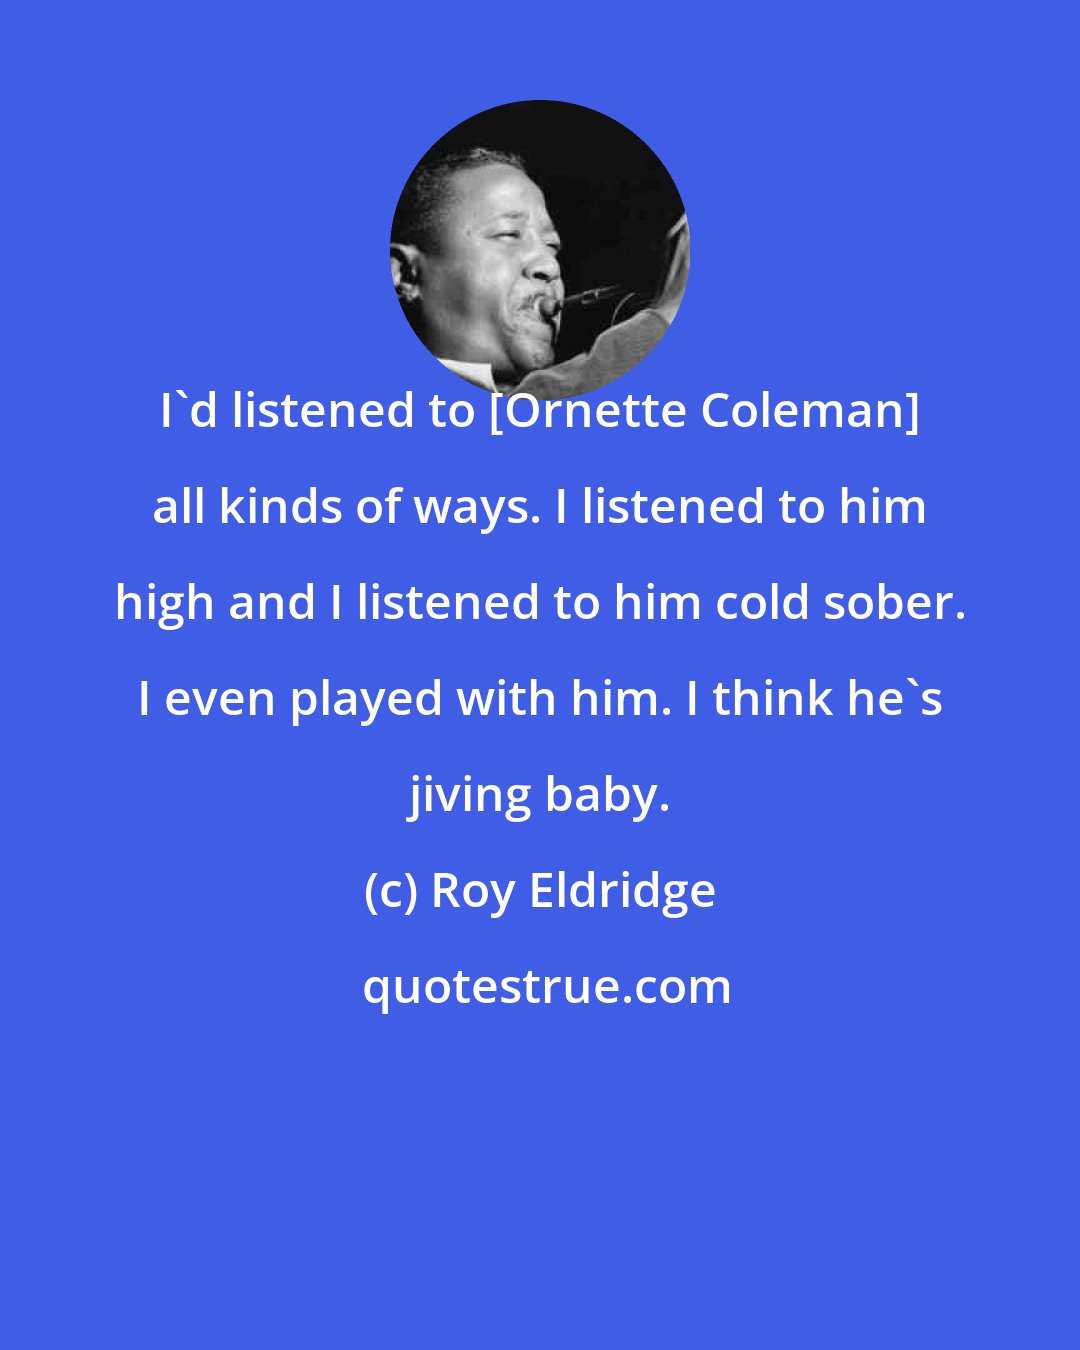 Roy Eldridge: I'd listened to [Ornette Coleman] all kinds of ways. I listened to him high and I listened to him cold sober. I even played with him. I think he's jiving baby.